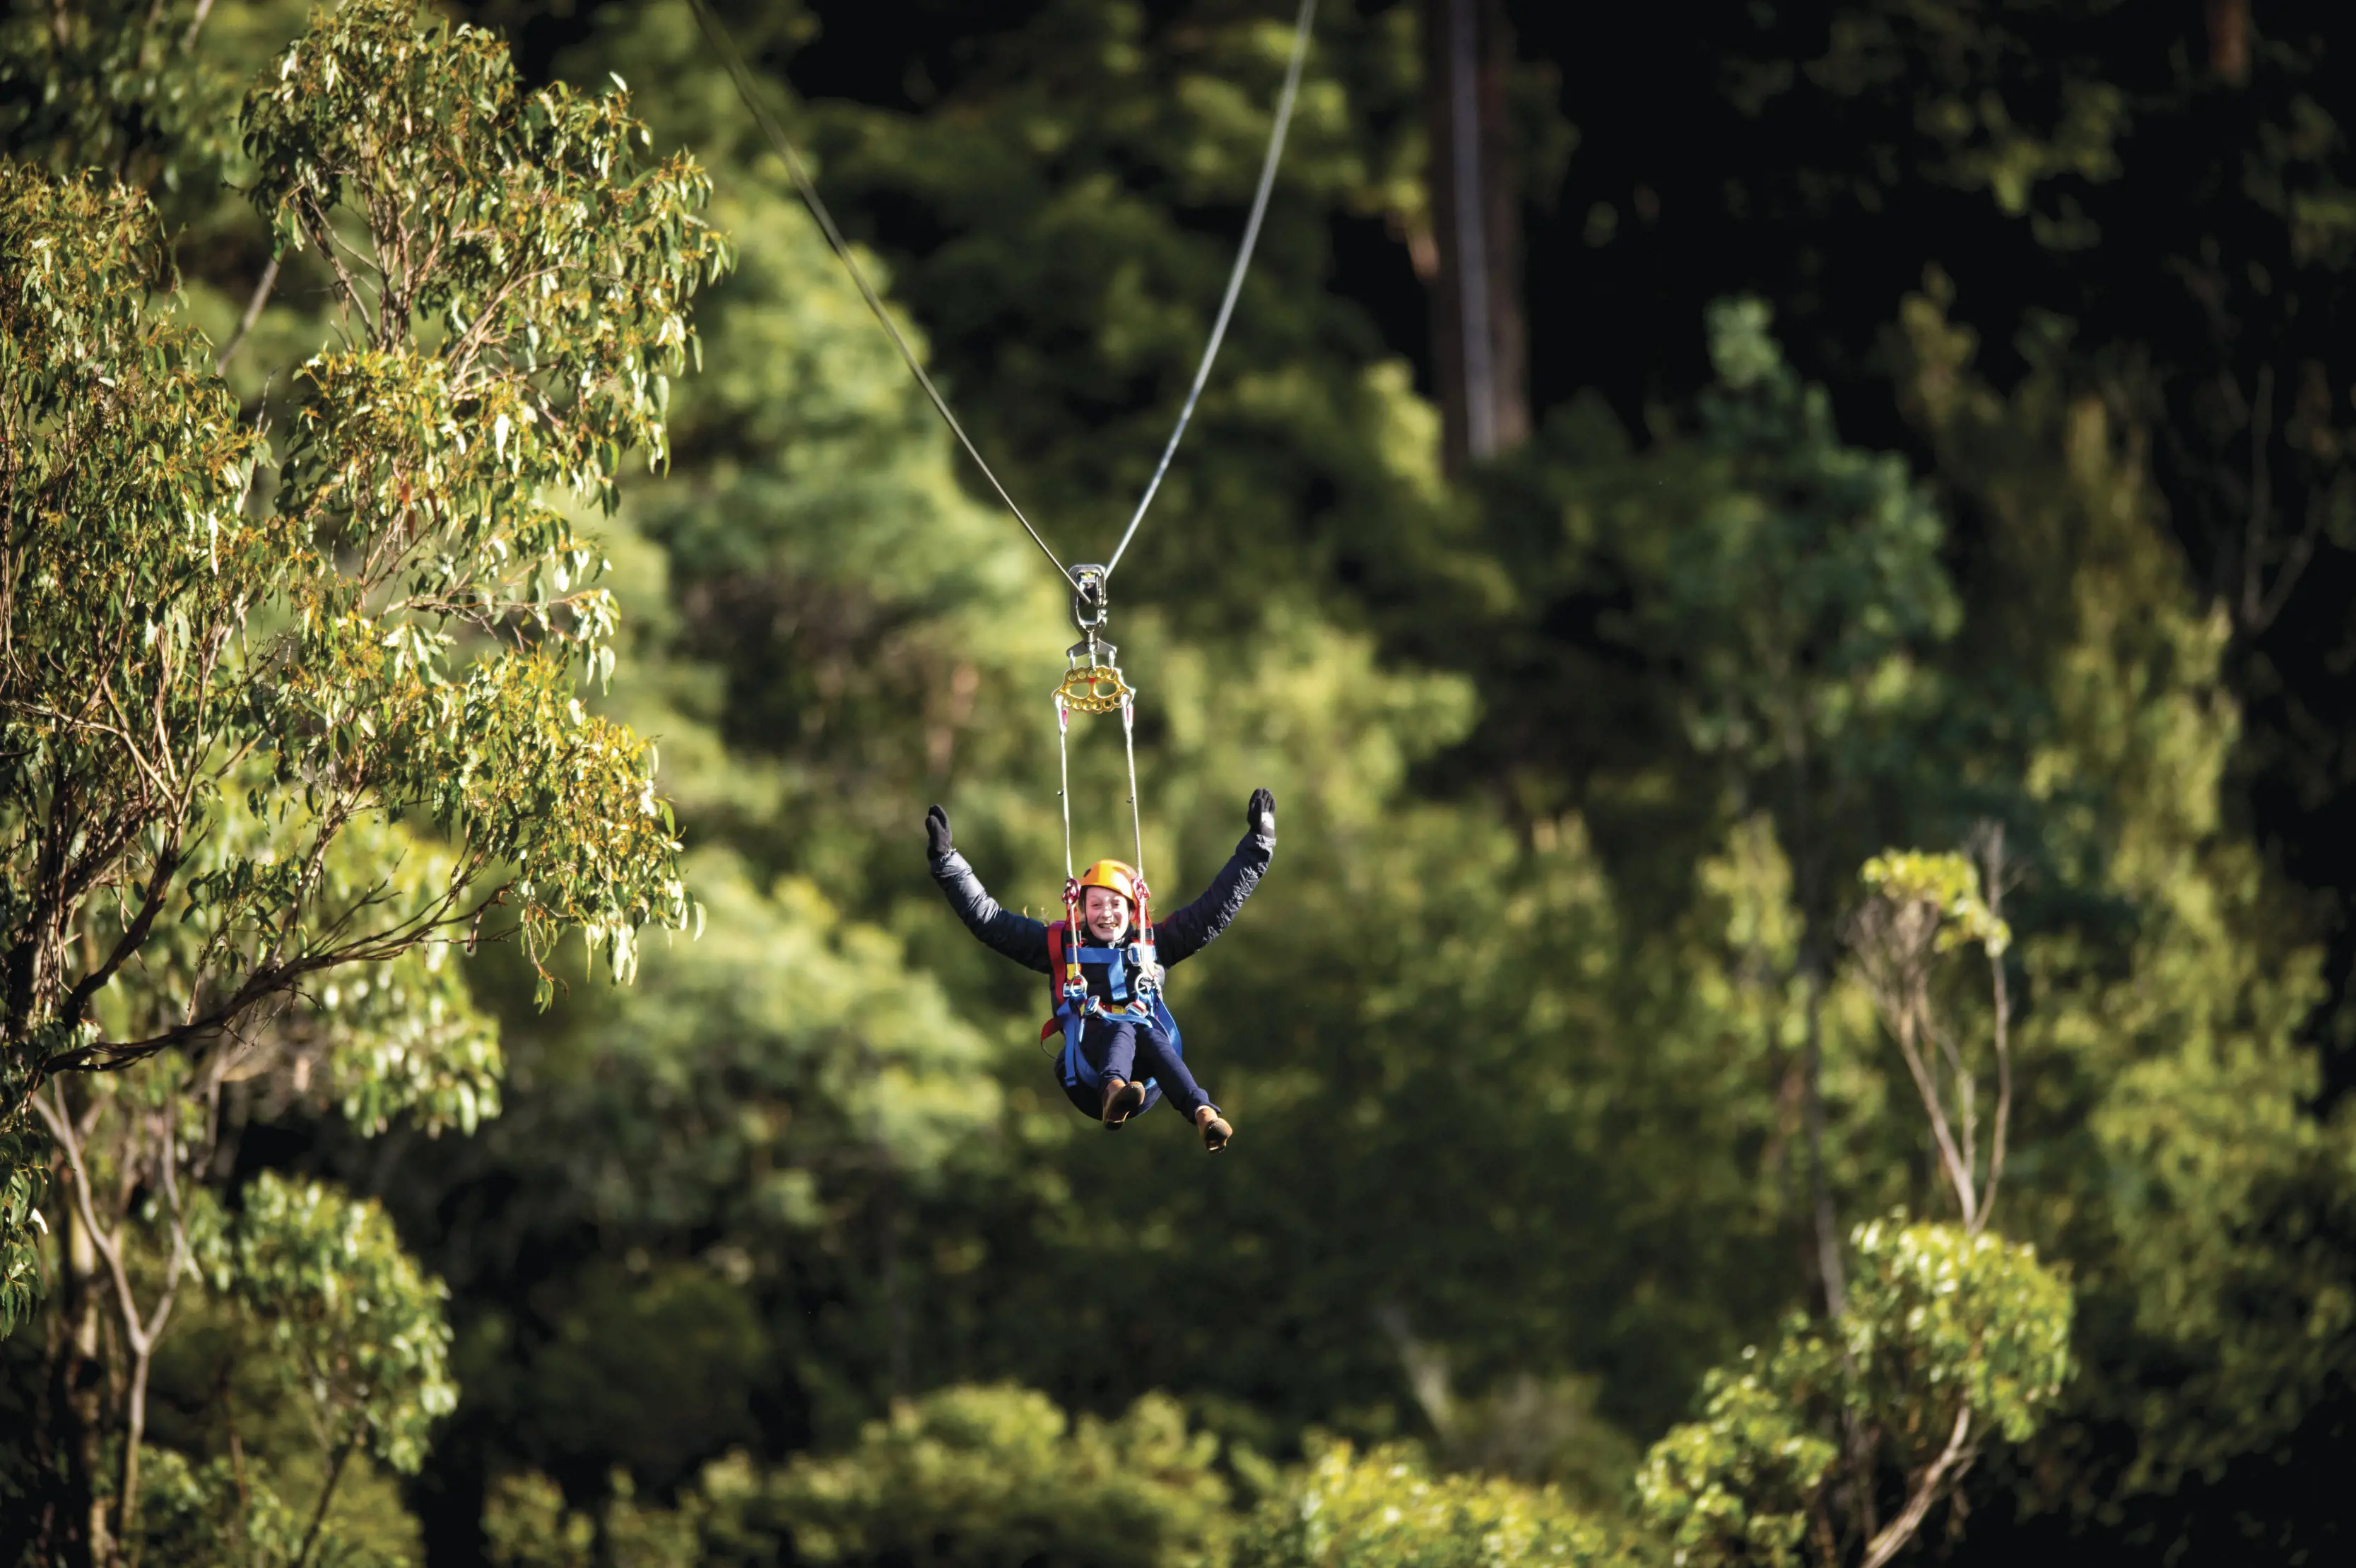 Child ziplines through the trees with their hands in the air at Hollybank Wilderness Adventures.